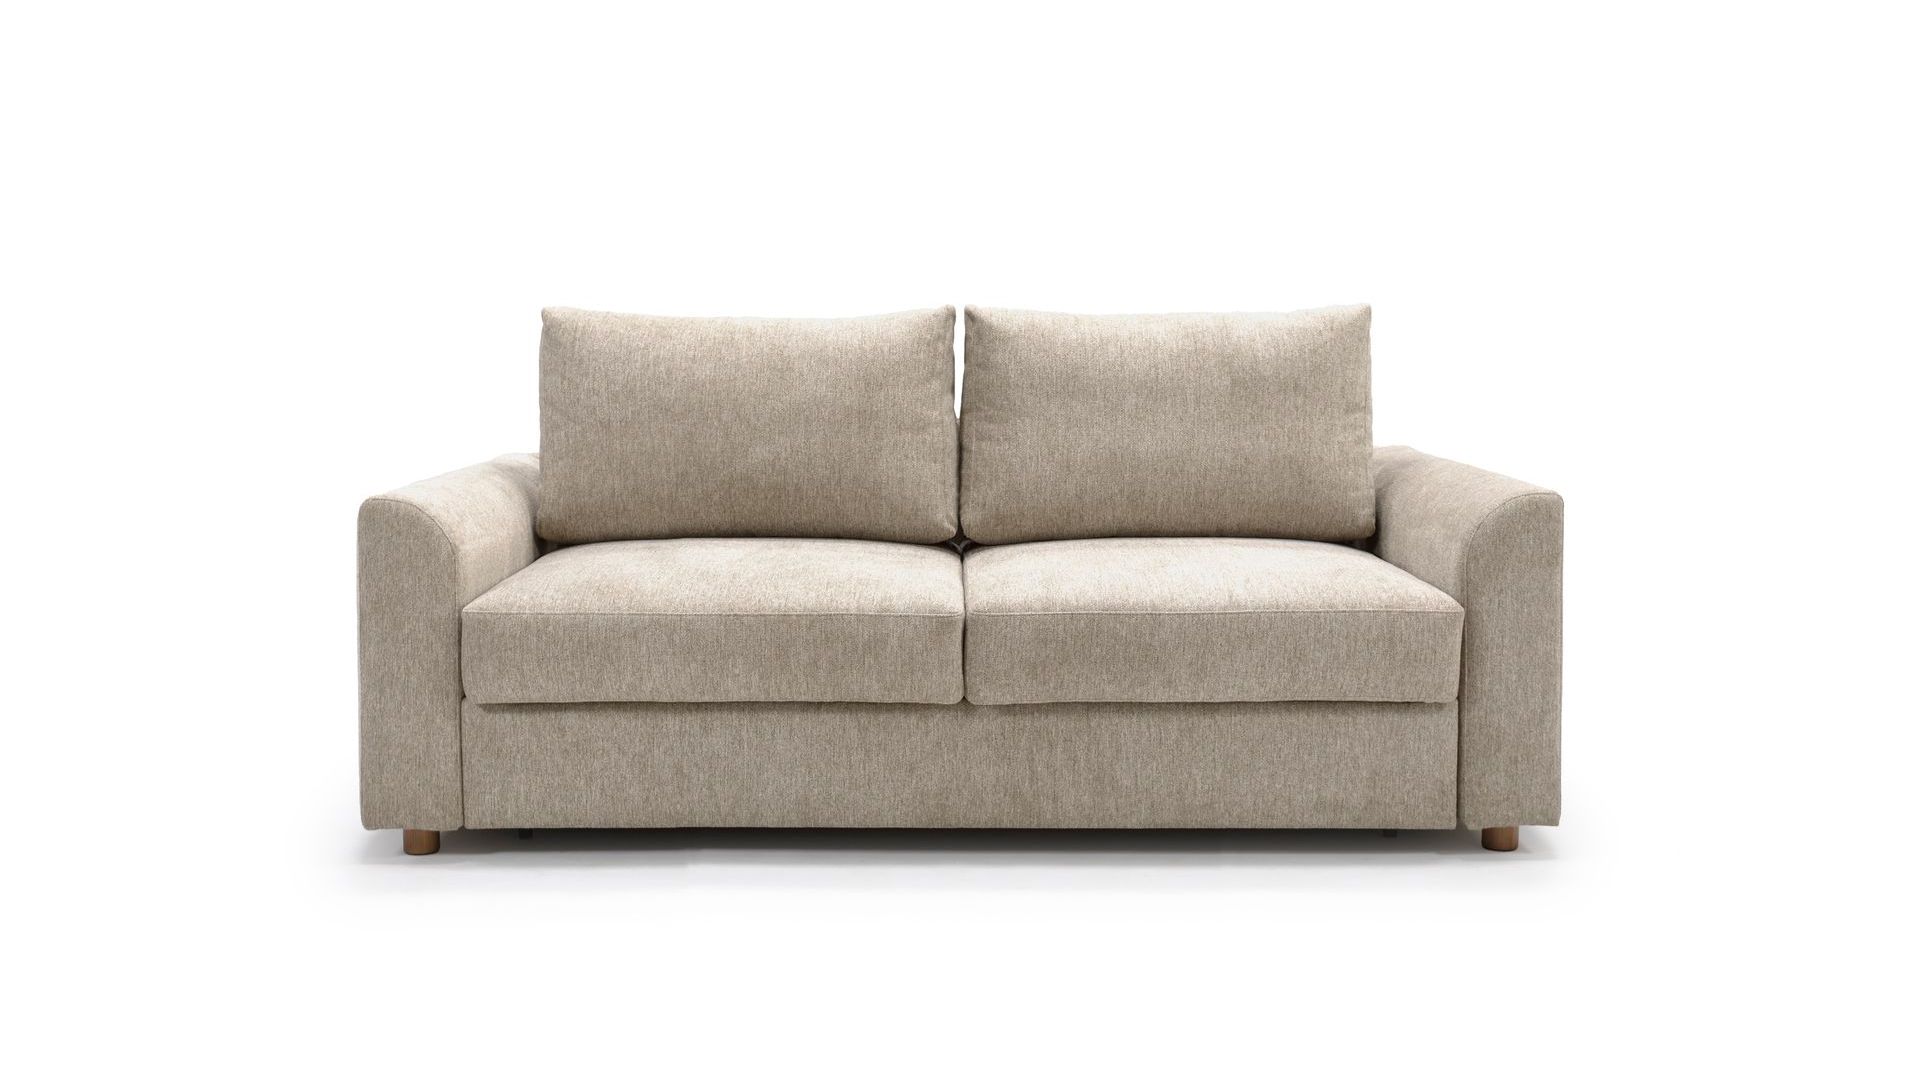 Dolphin Sleeper Sofa From Luonto Furniture